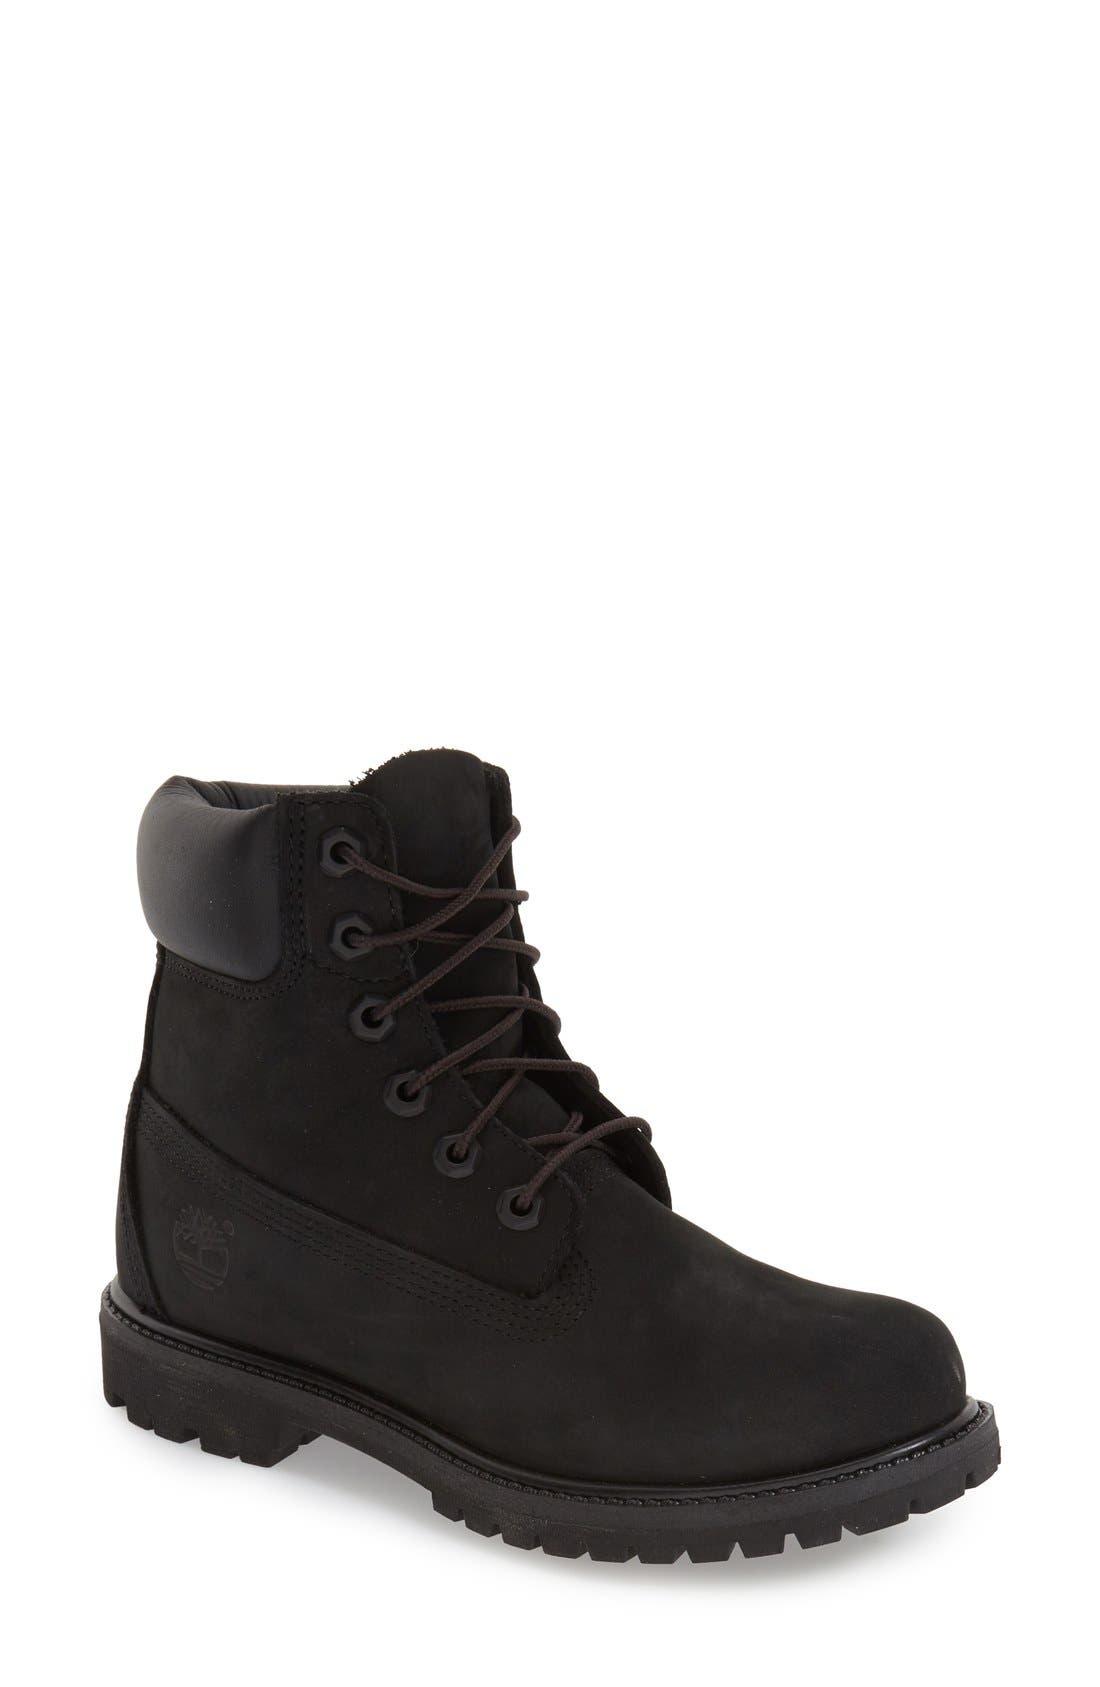 timberland black boots 6 inch